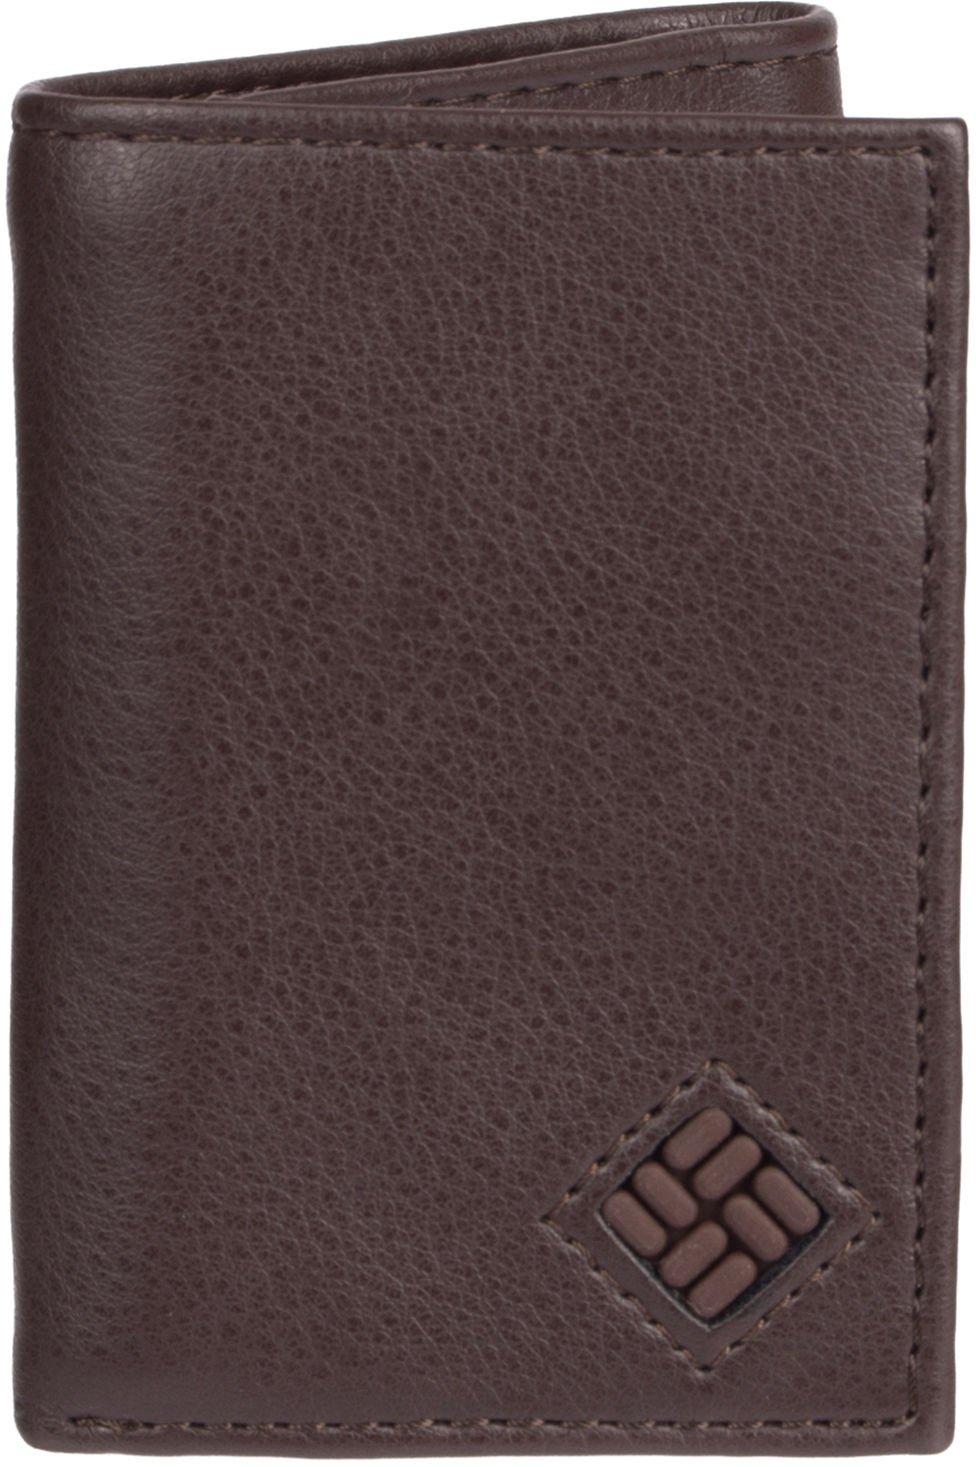 Columbia Mens Brown Trifold Leather Wallet